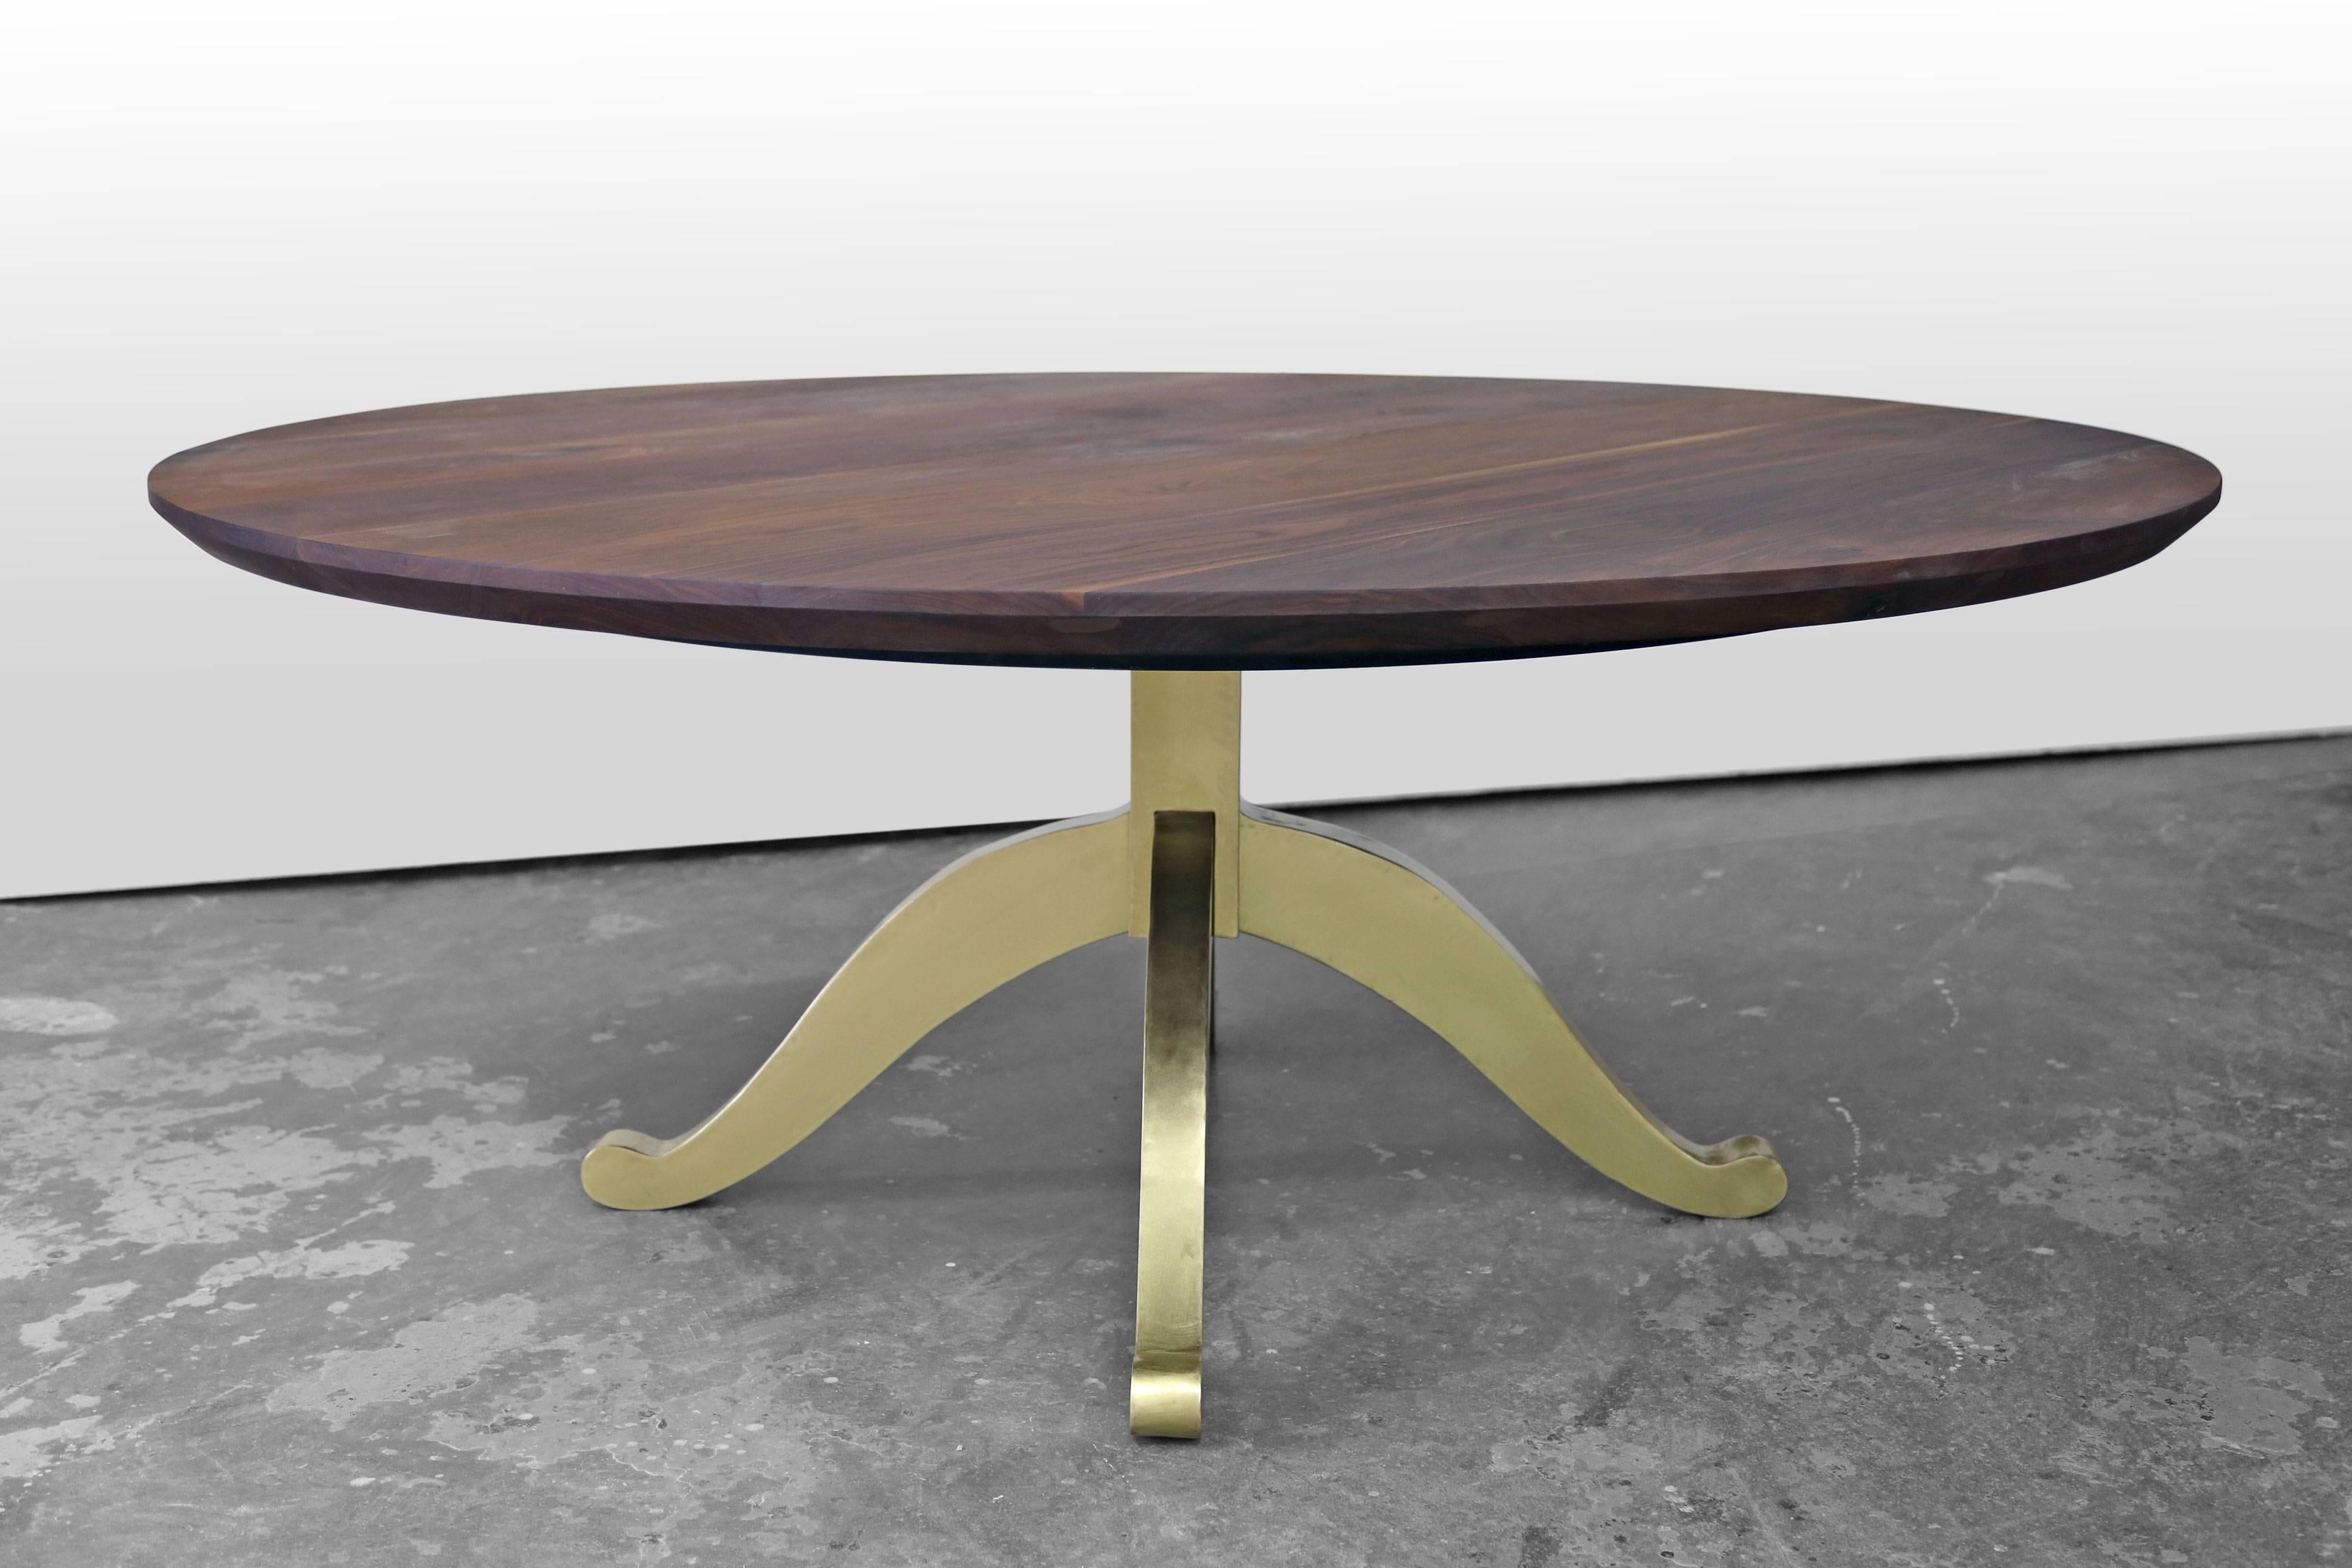 This table design features a large round walnut top and a wishbone pedestal base with a bright brass finish. The top is 76 inches across. We source our walnut from a family owned lumber mill in Pennsylvania and we make each of our tables to order in